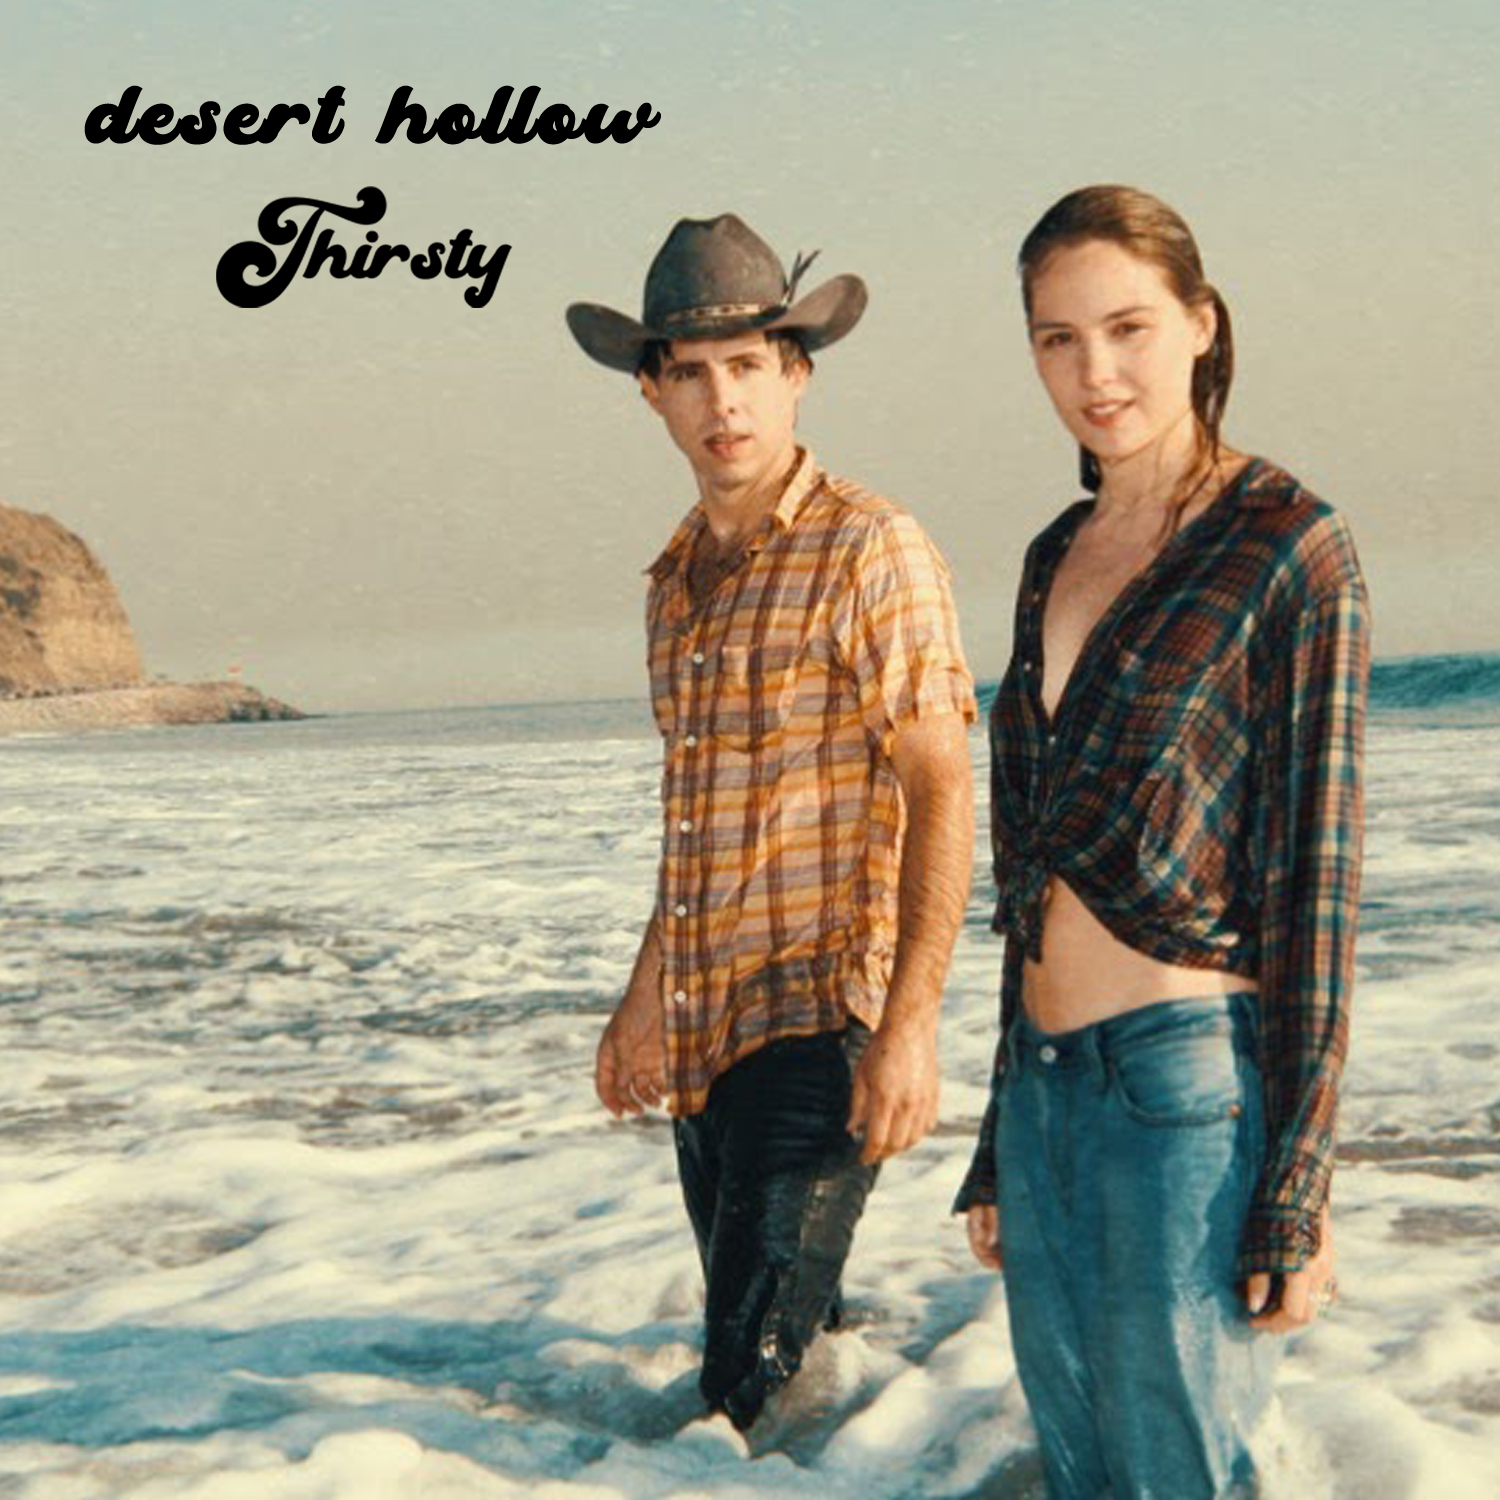 DESERT HOLLOW TO RELEASE DEBUT EP, THIRSTY